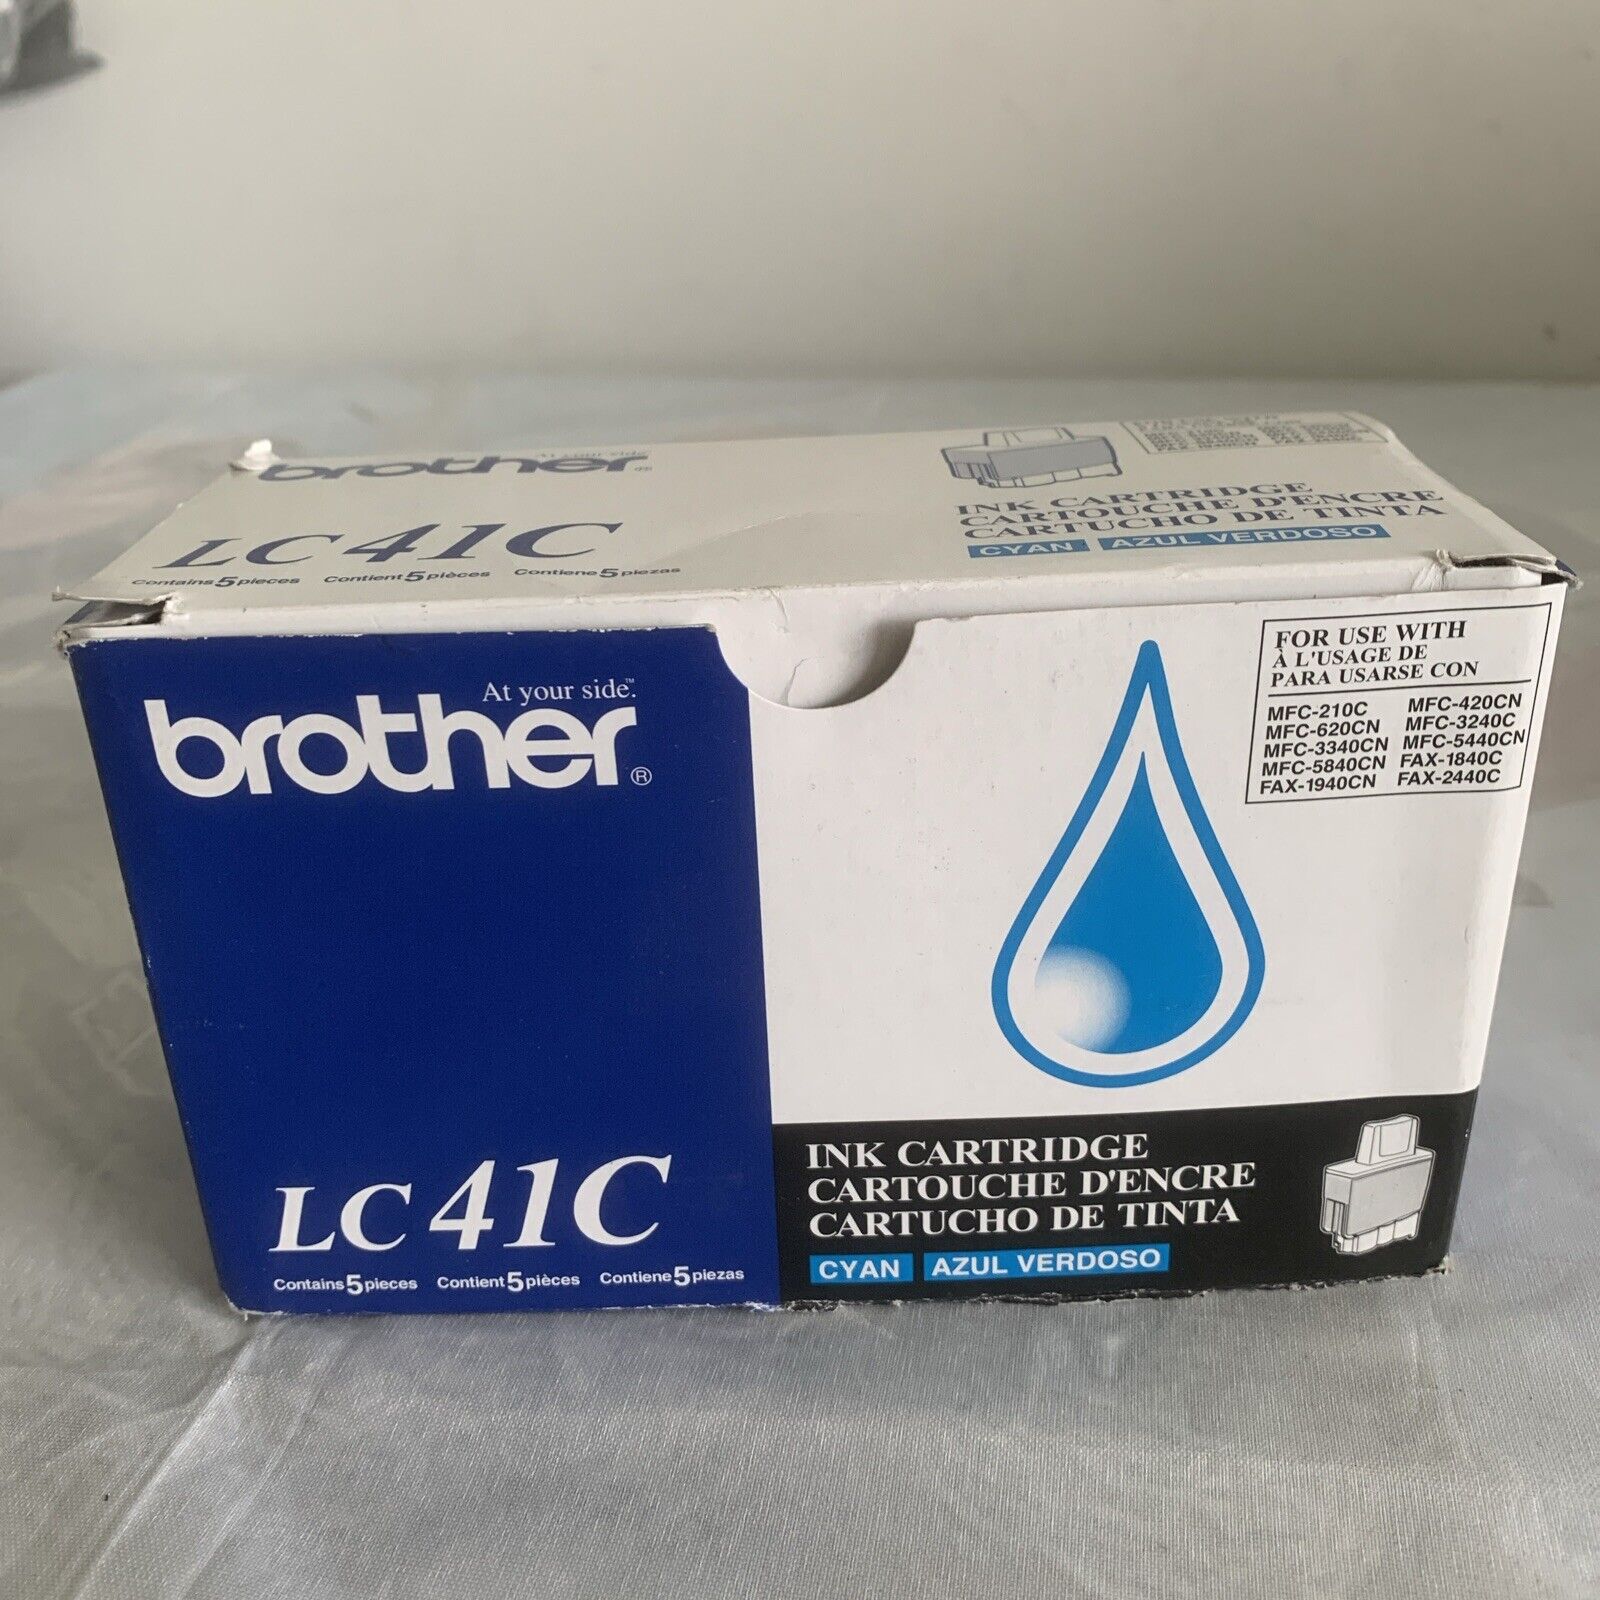 5 Pack Of Brother Ink Cartridge LC41C Cyan New In Box Expired 2011/6 & 2013/6